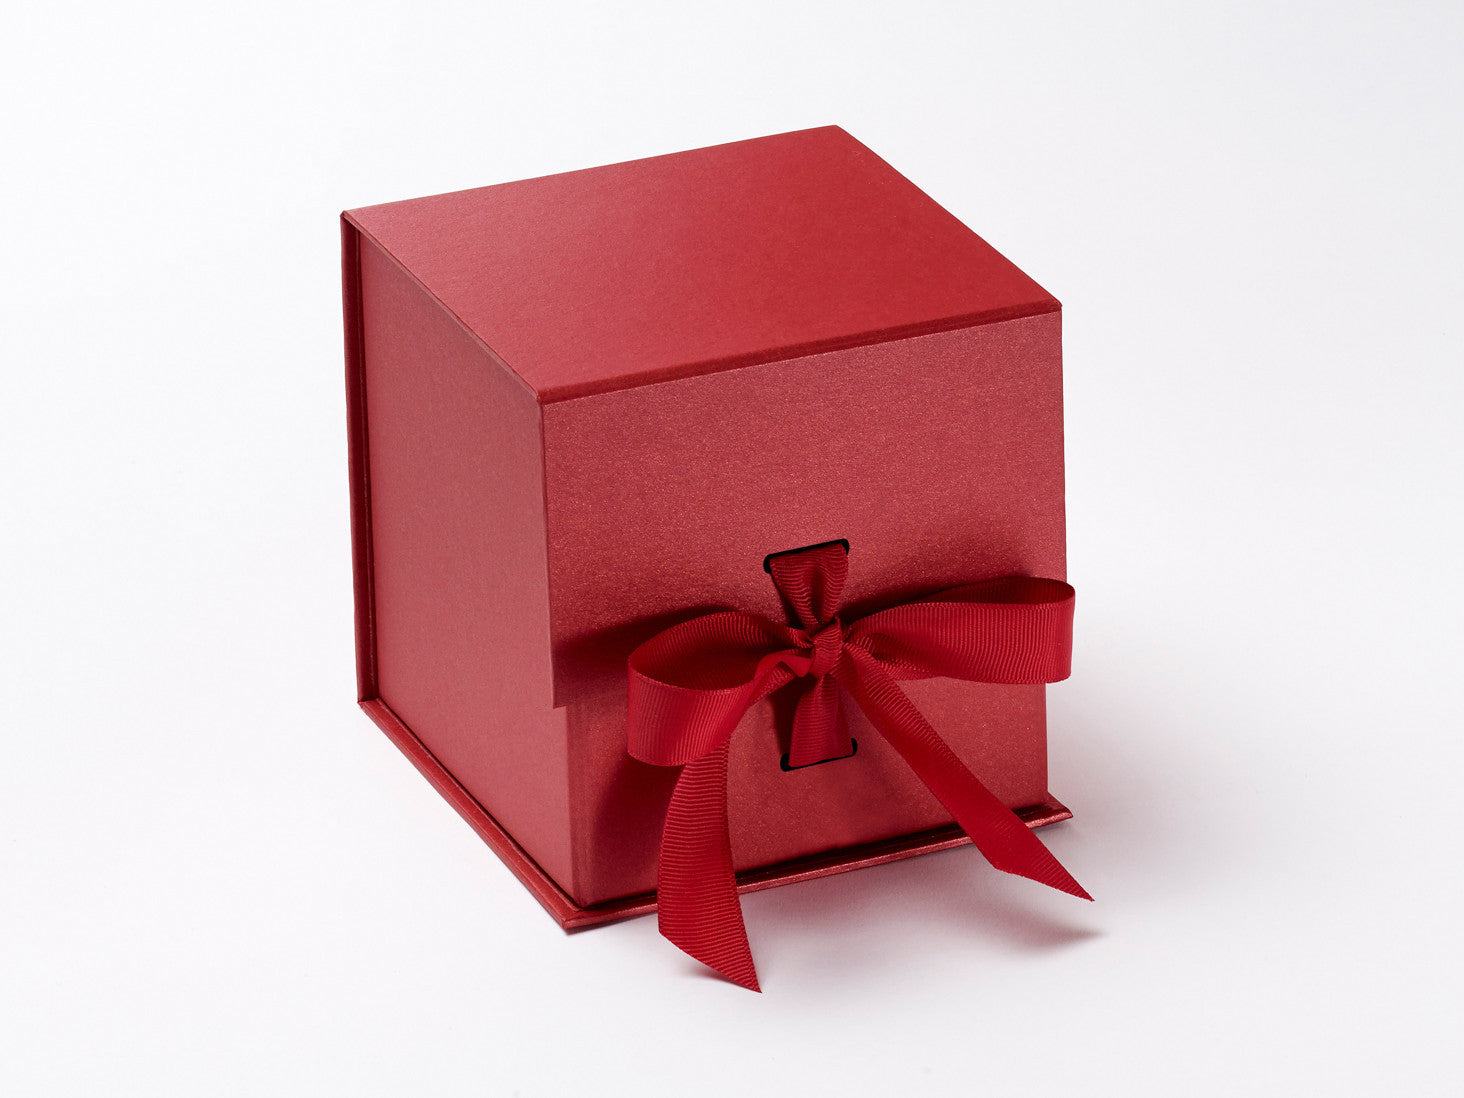 Large 5" Large Cube Gift Box in Red Pearl finish with Slots and Changeable Ribbon